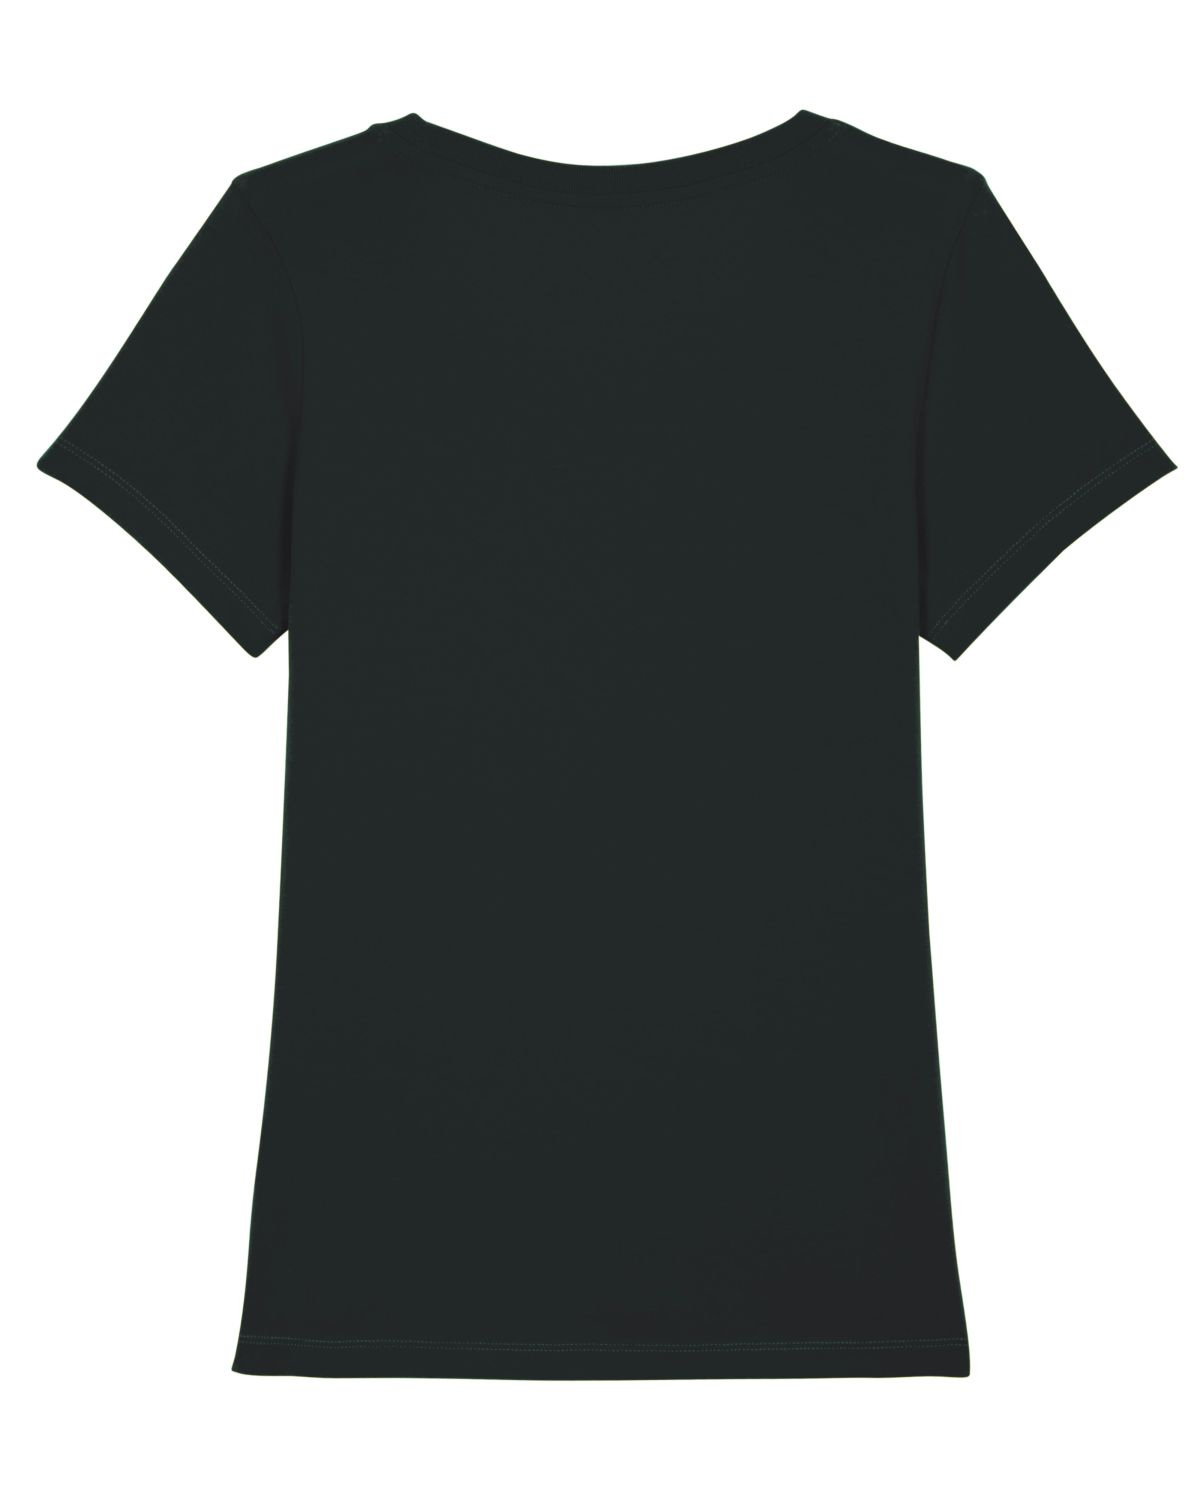 Fitted-Shirt "Black"